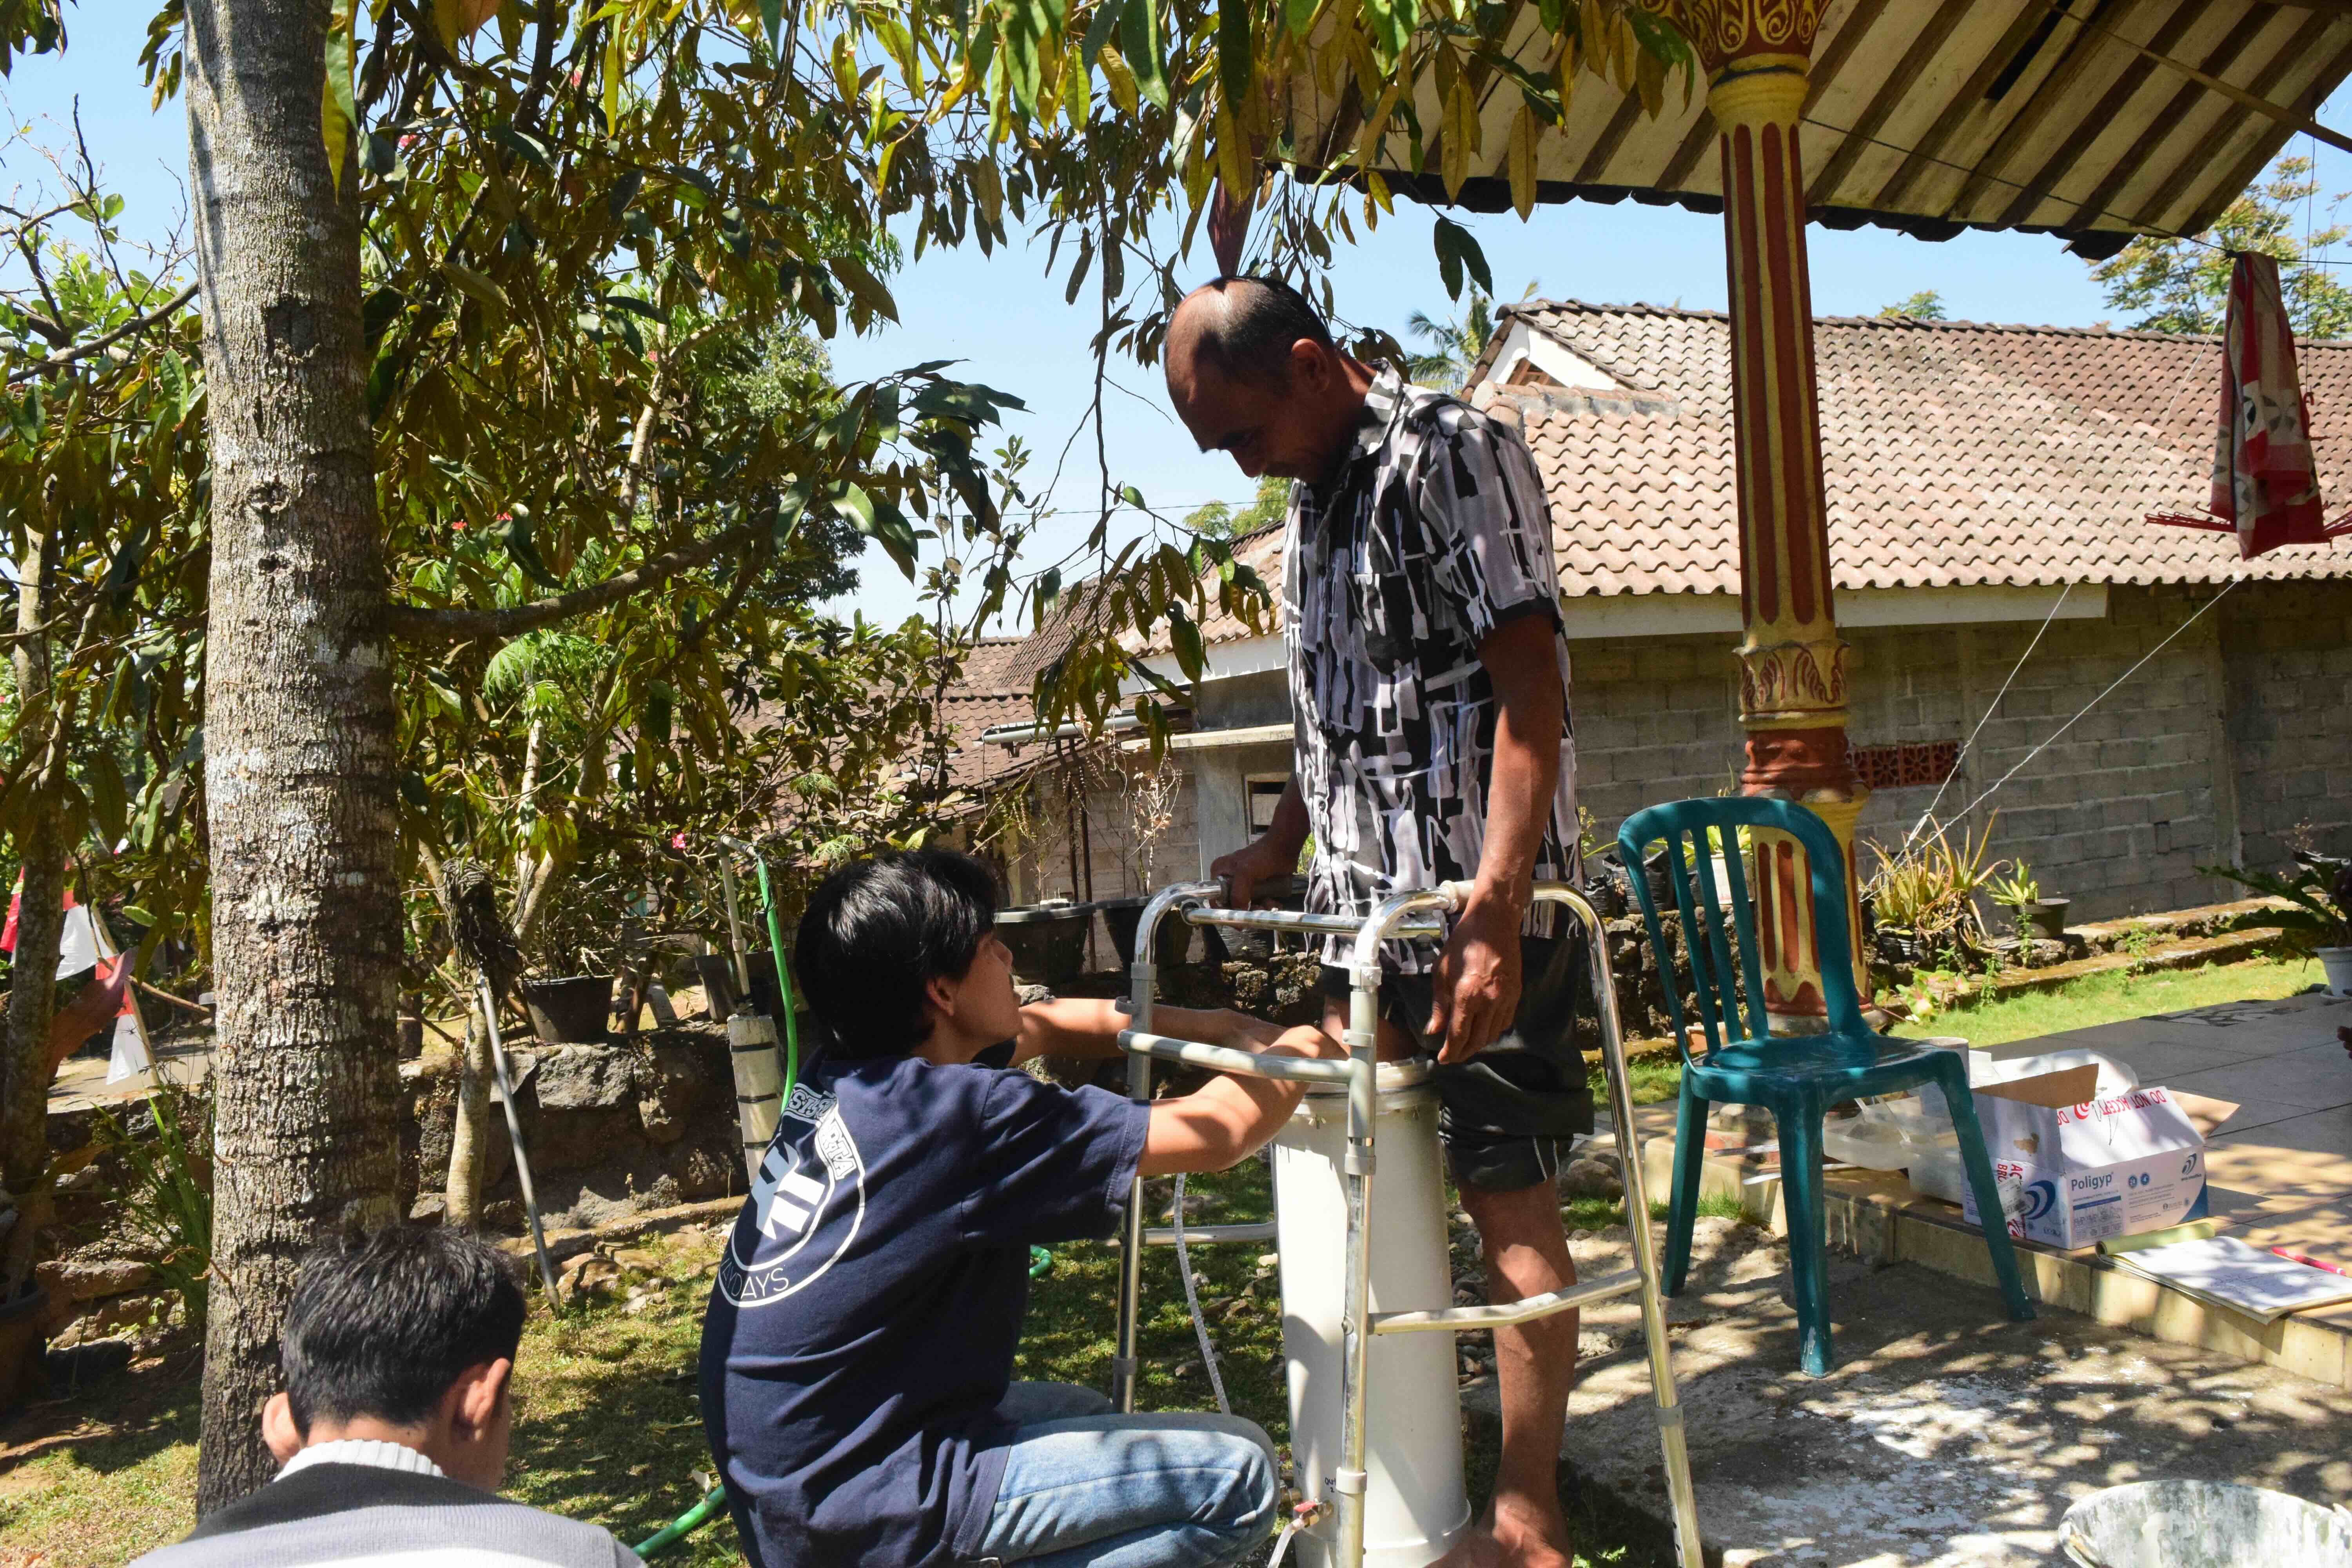 A prosthetic leg being made in a village